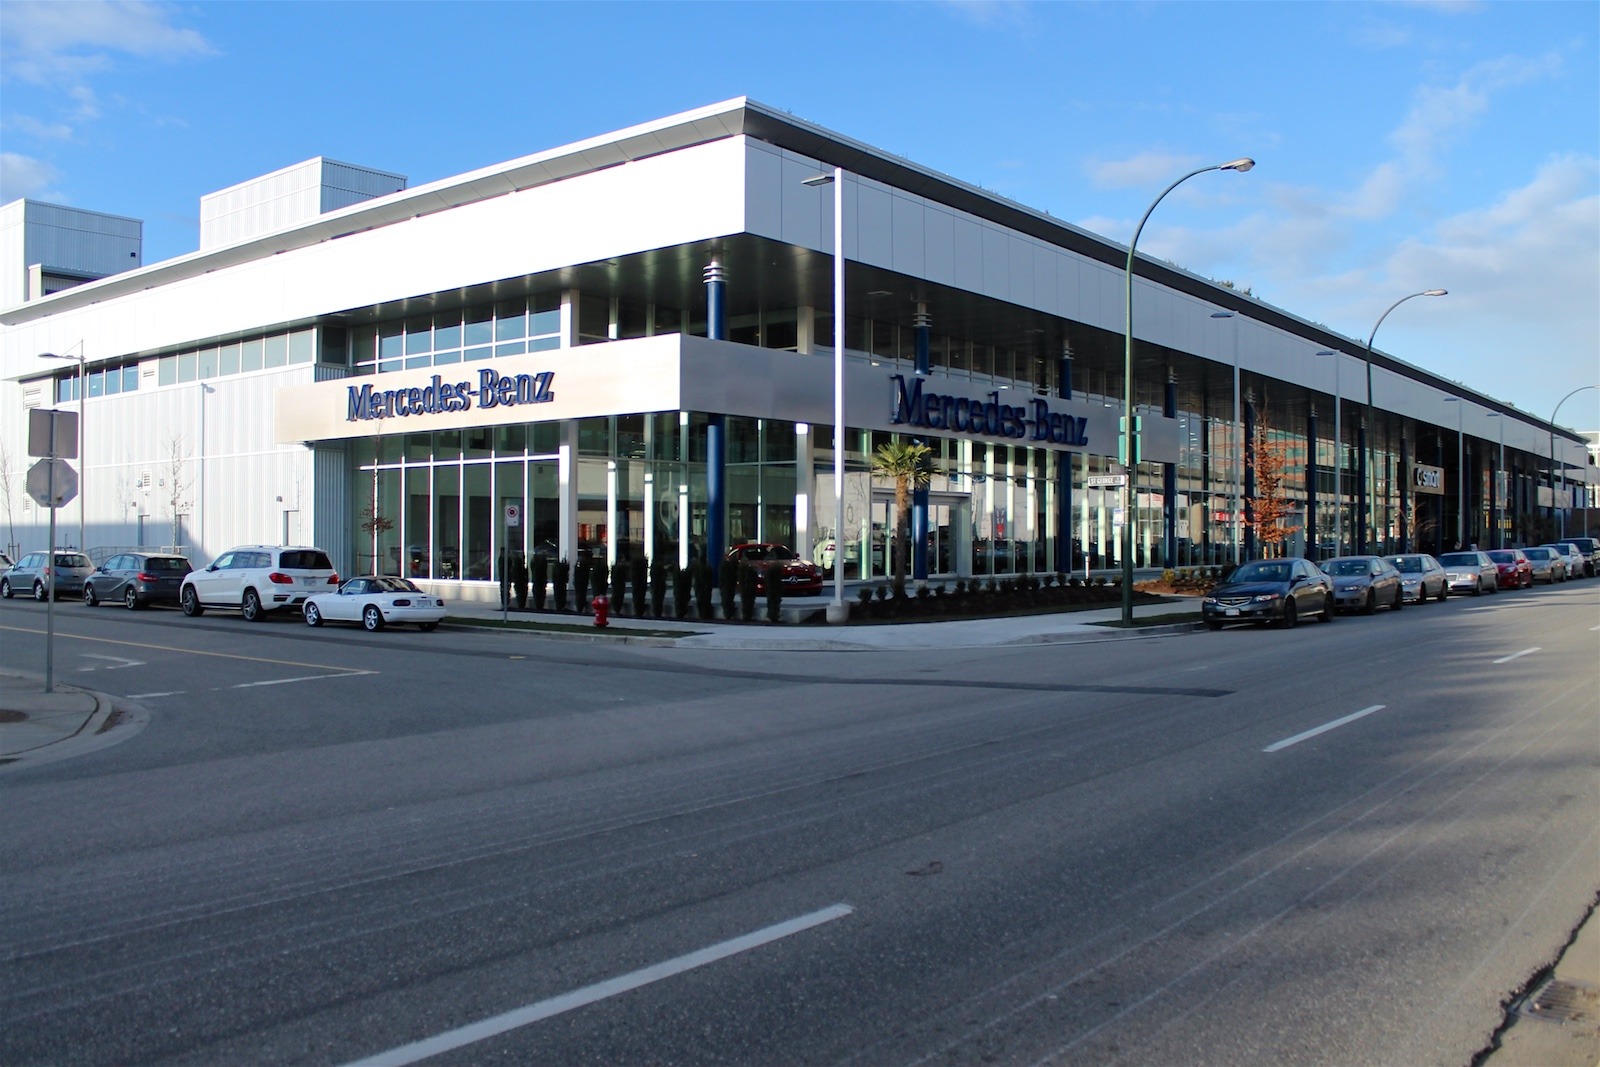 Mercedes-Benz Vancouver Luxury Car Dealership Completed 2013